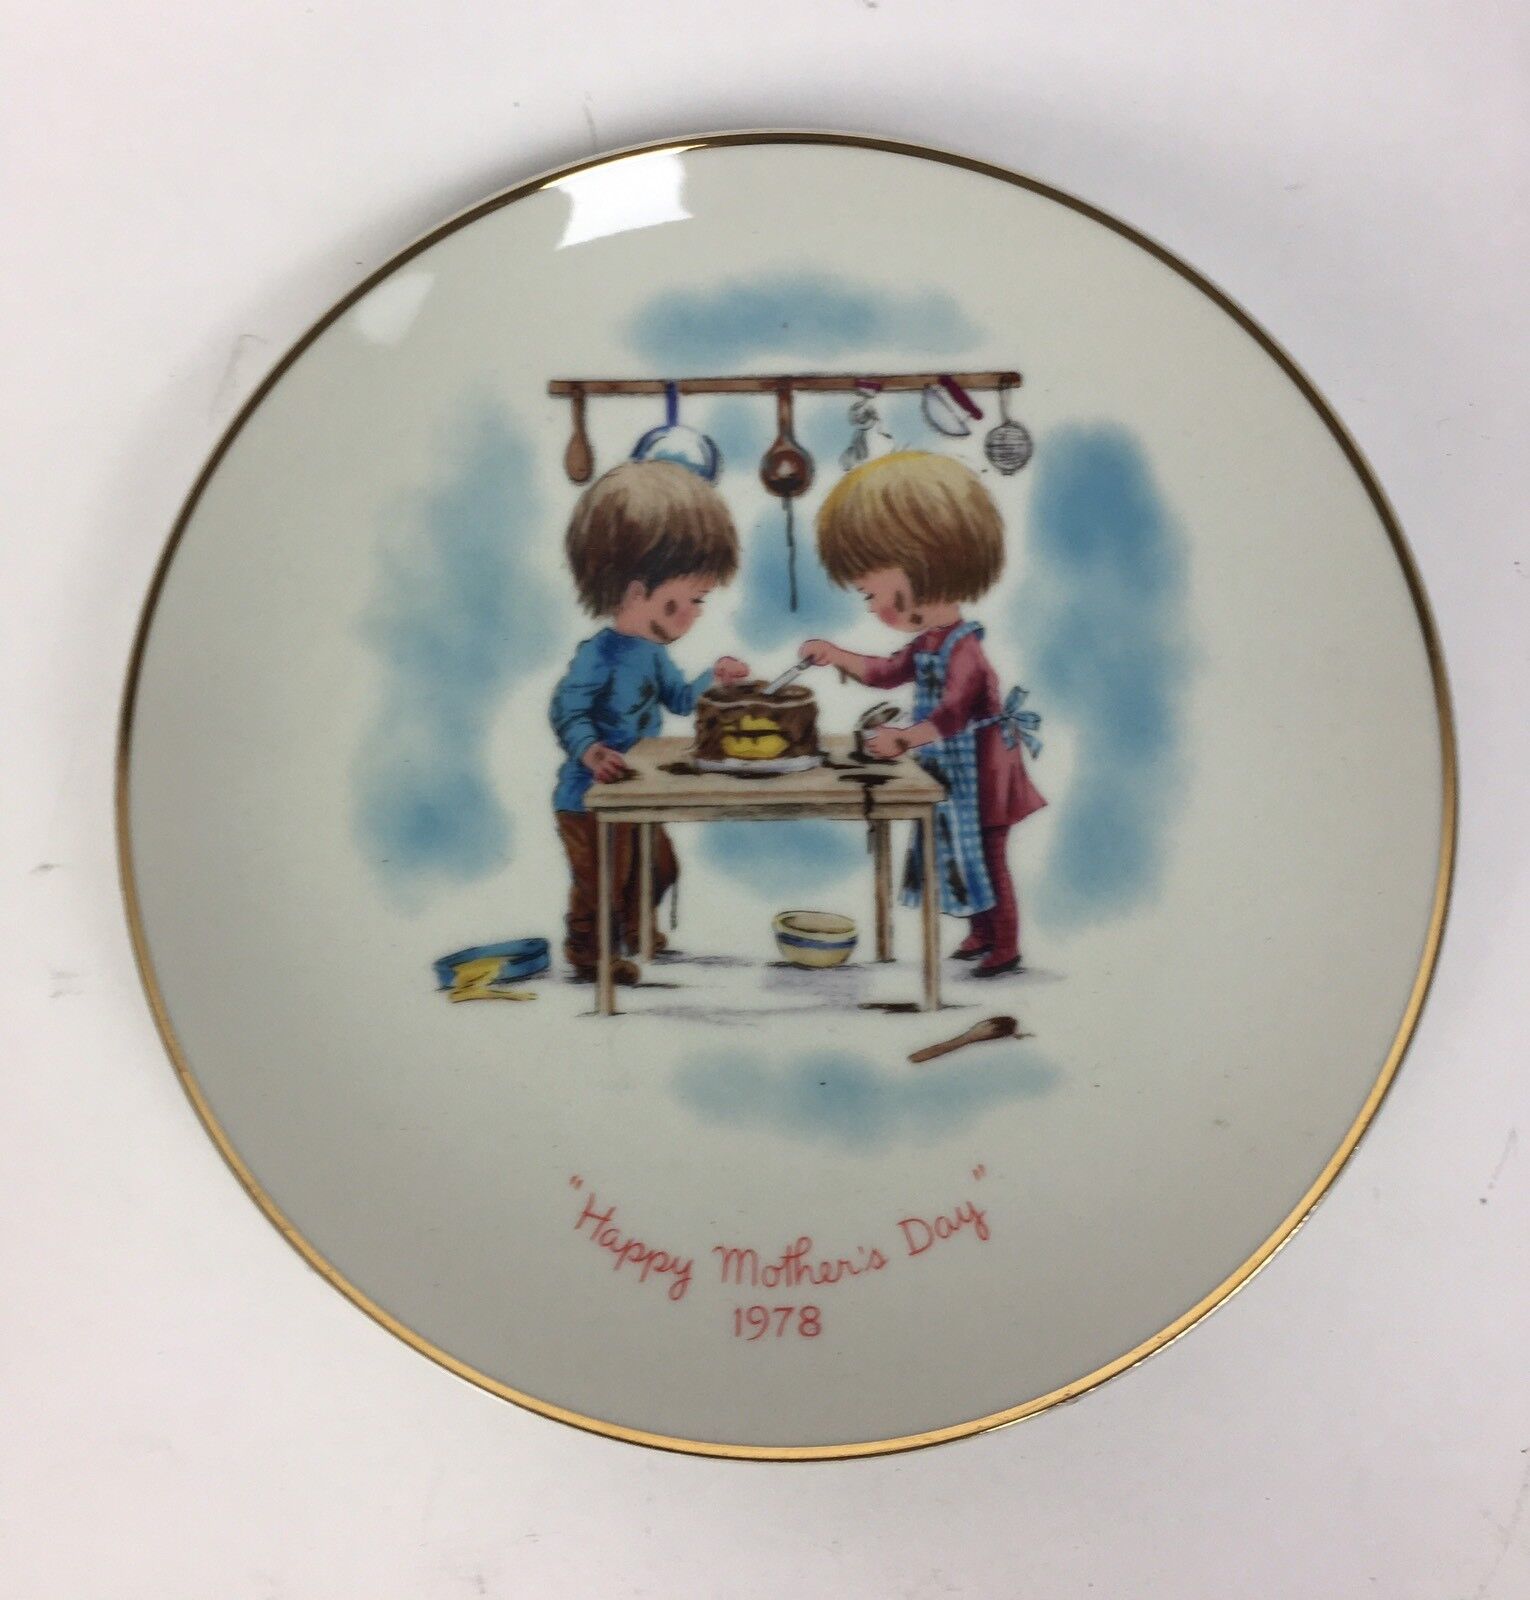 Primary image for Gorham MOPPETS PLATE 1978 Happy Mothers Day 68358